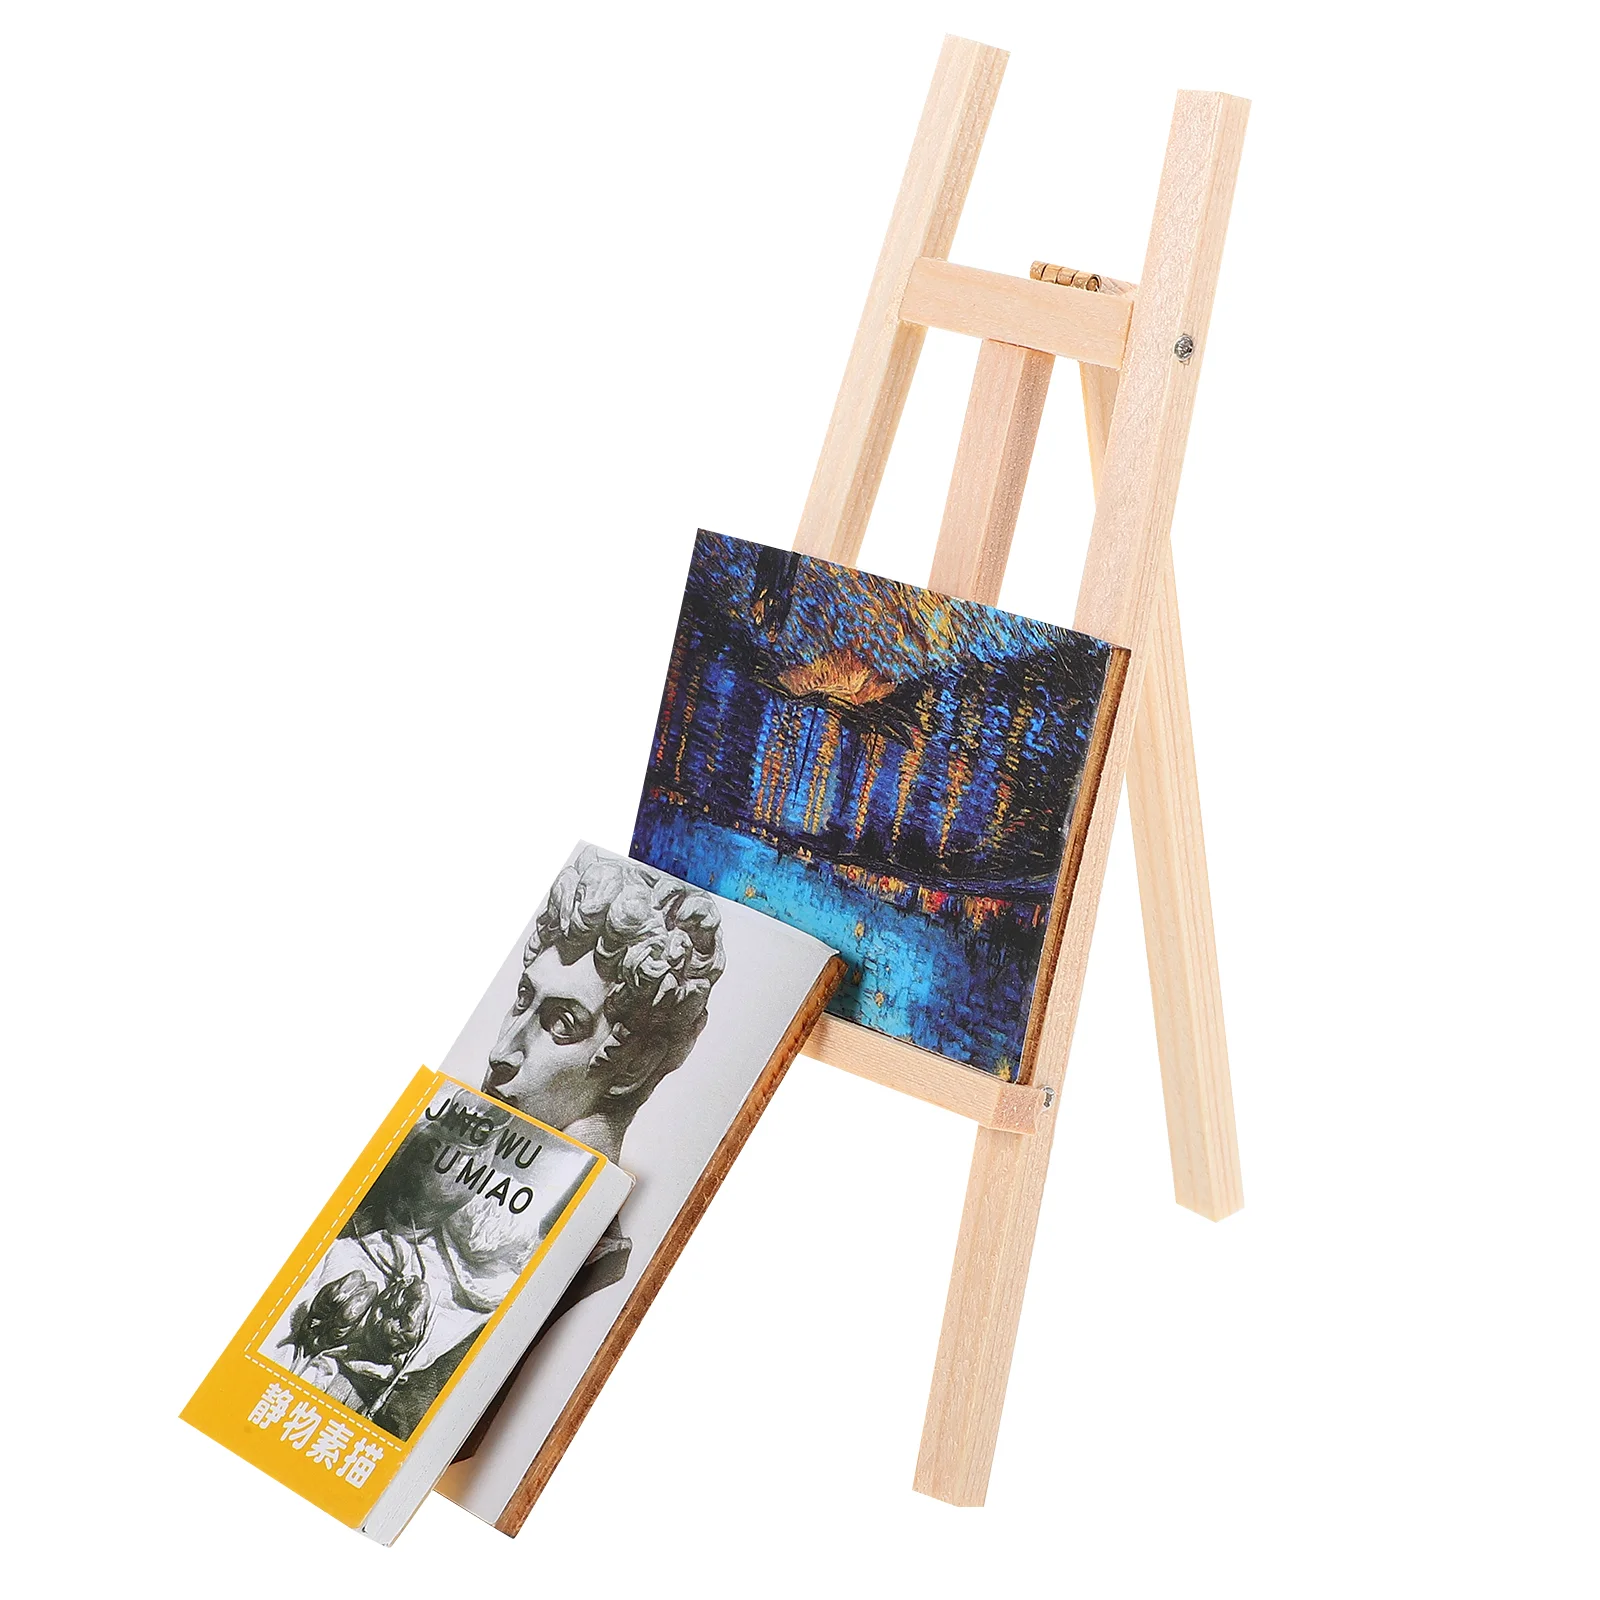 House Decorative Painting Mini Adornment Miniature Easel Wooden Board Furniture Small Model wooden sit stand drawing desk engineering drawing table easel painting architectural plate drawing art sketching table